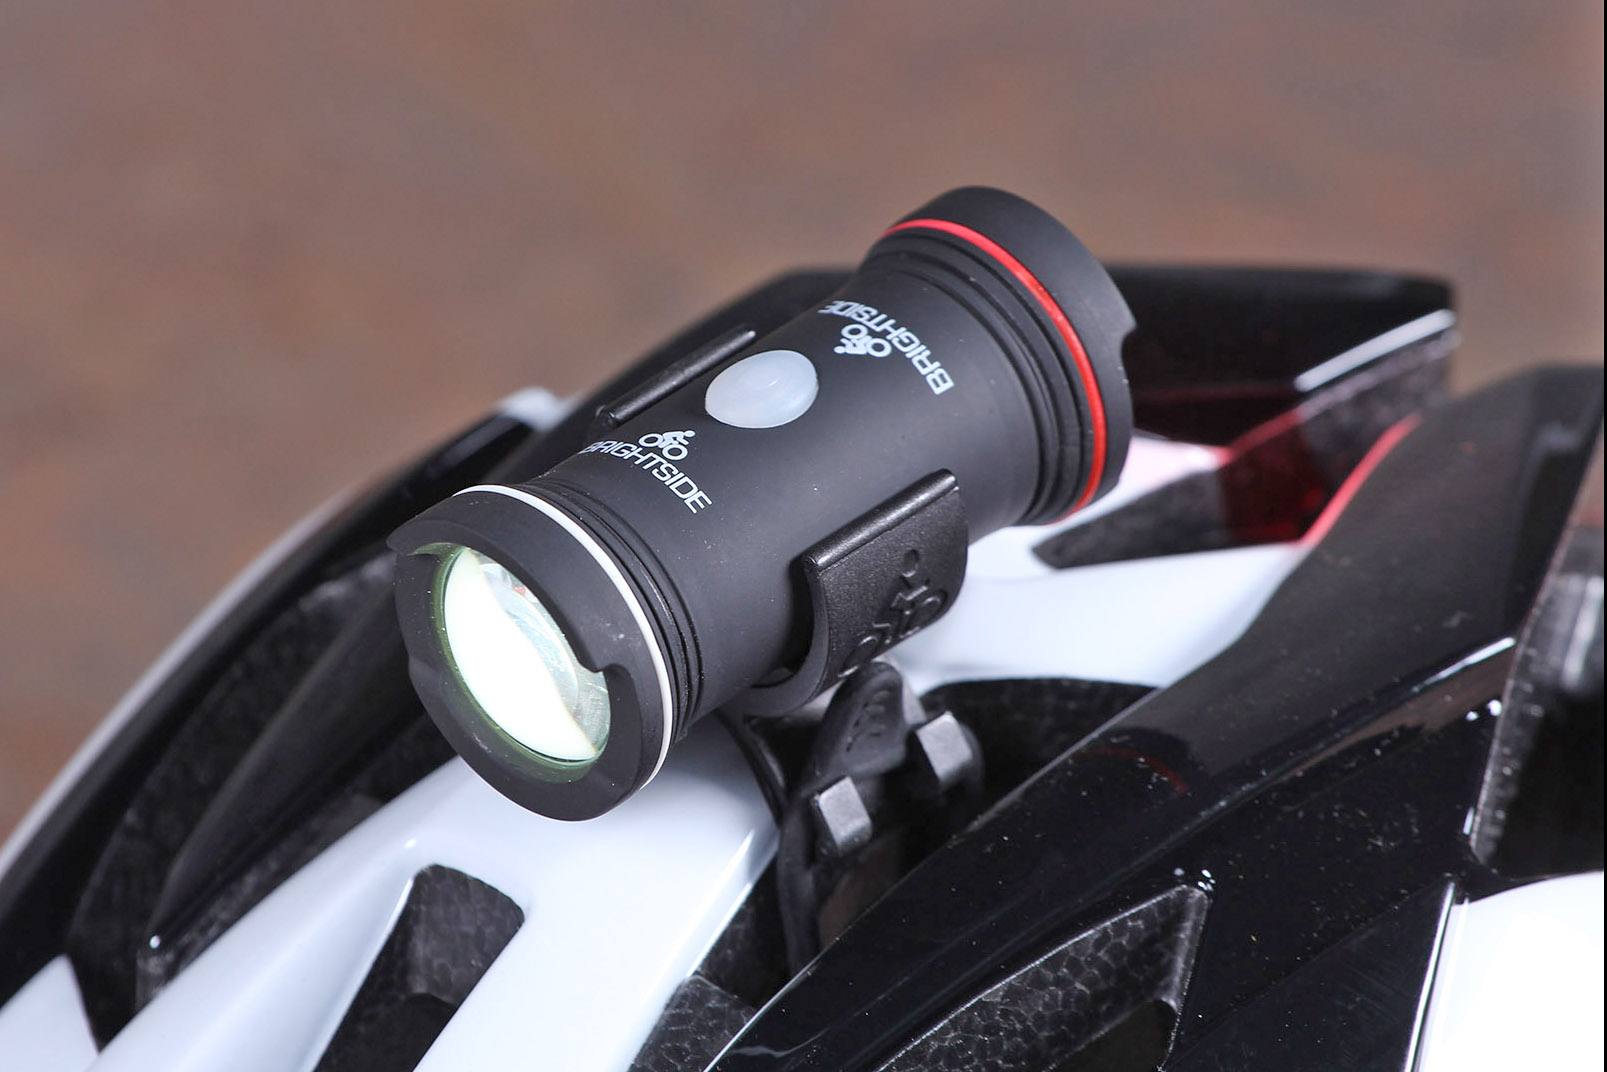 Brightside Amber Side Lights For Cyclists Rechargeable and Waterproof Bright 20 Hours Run Time